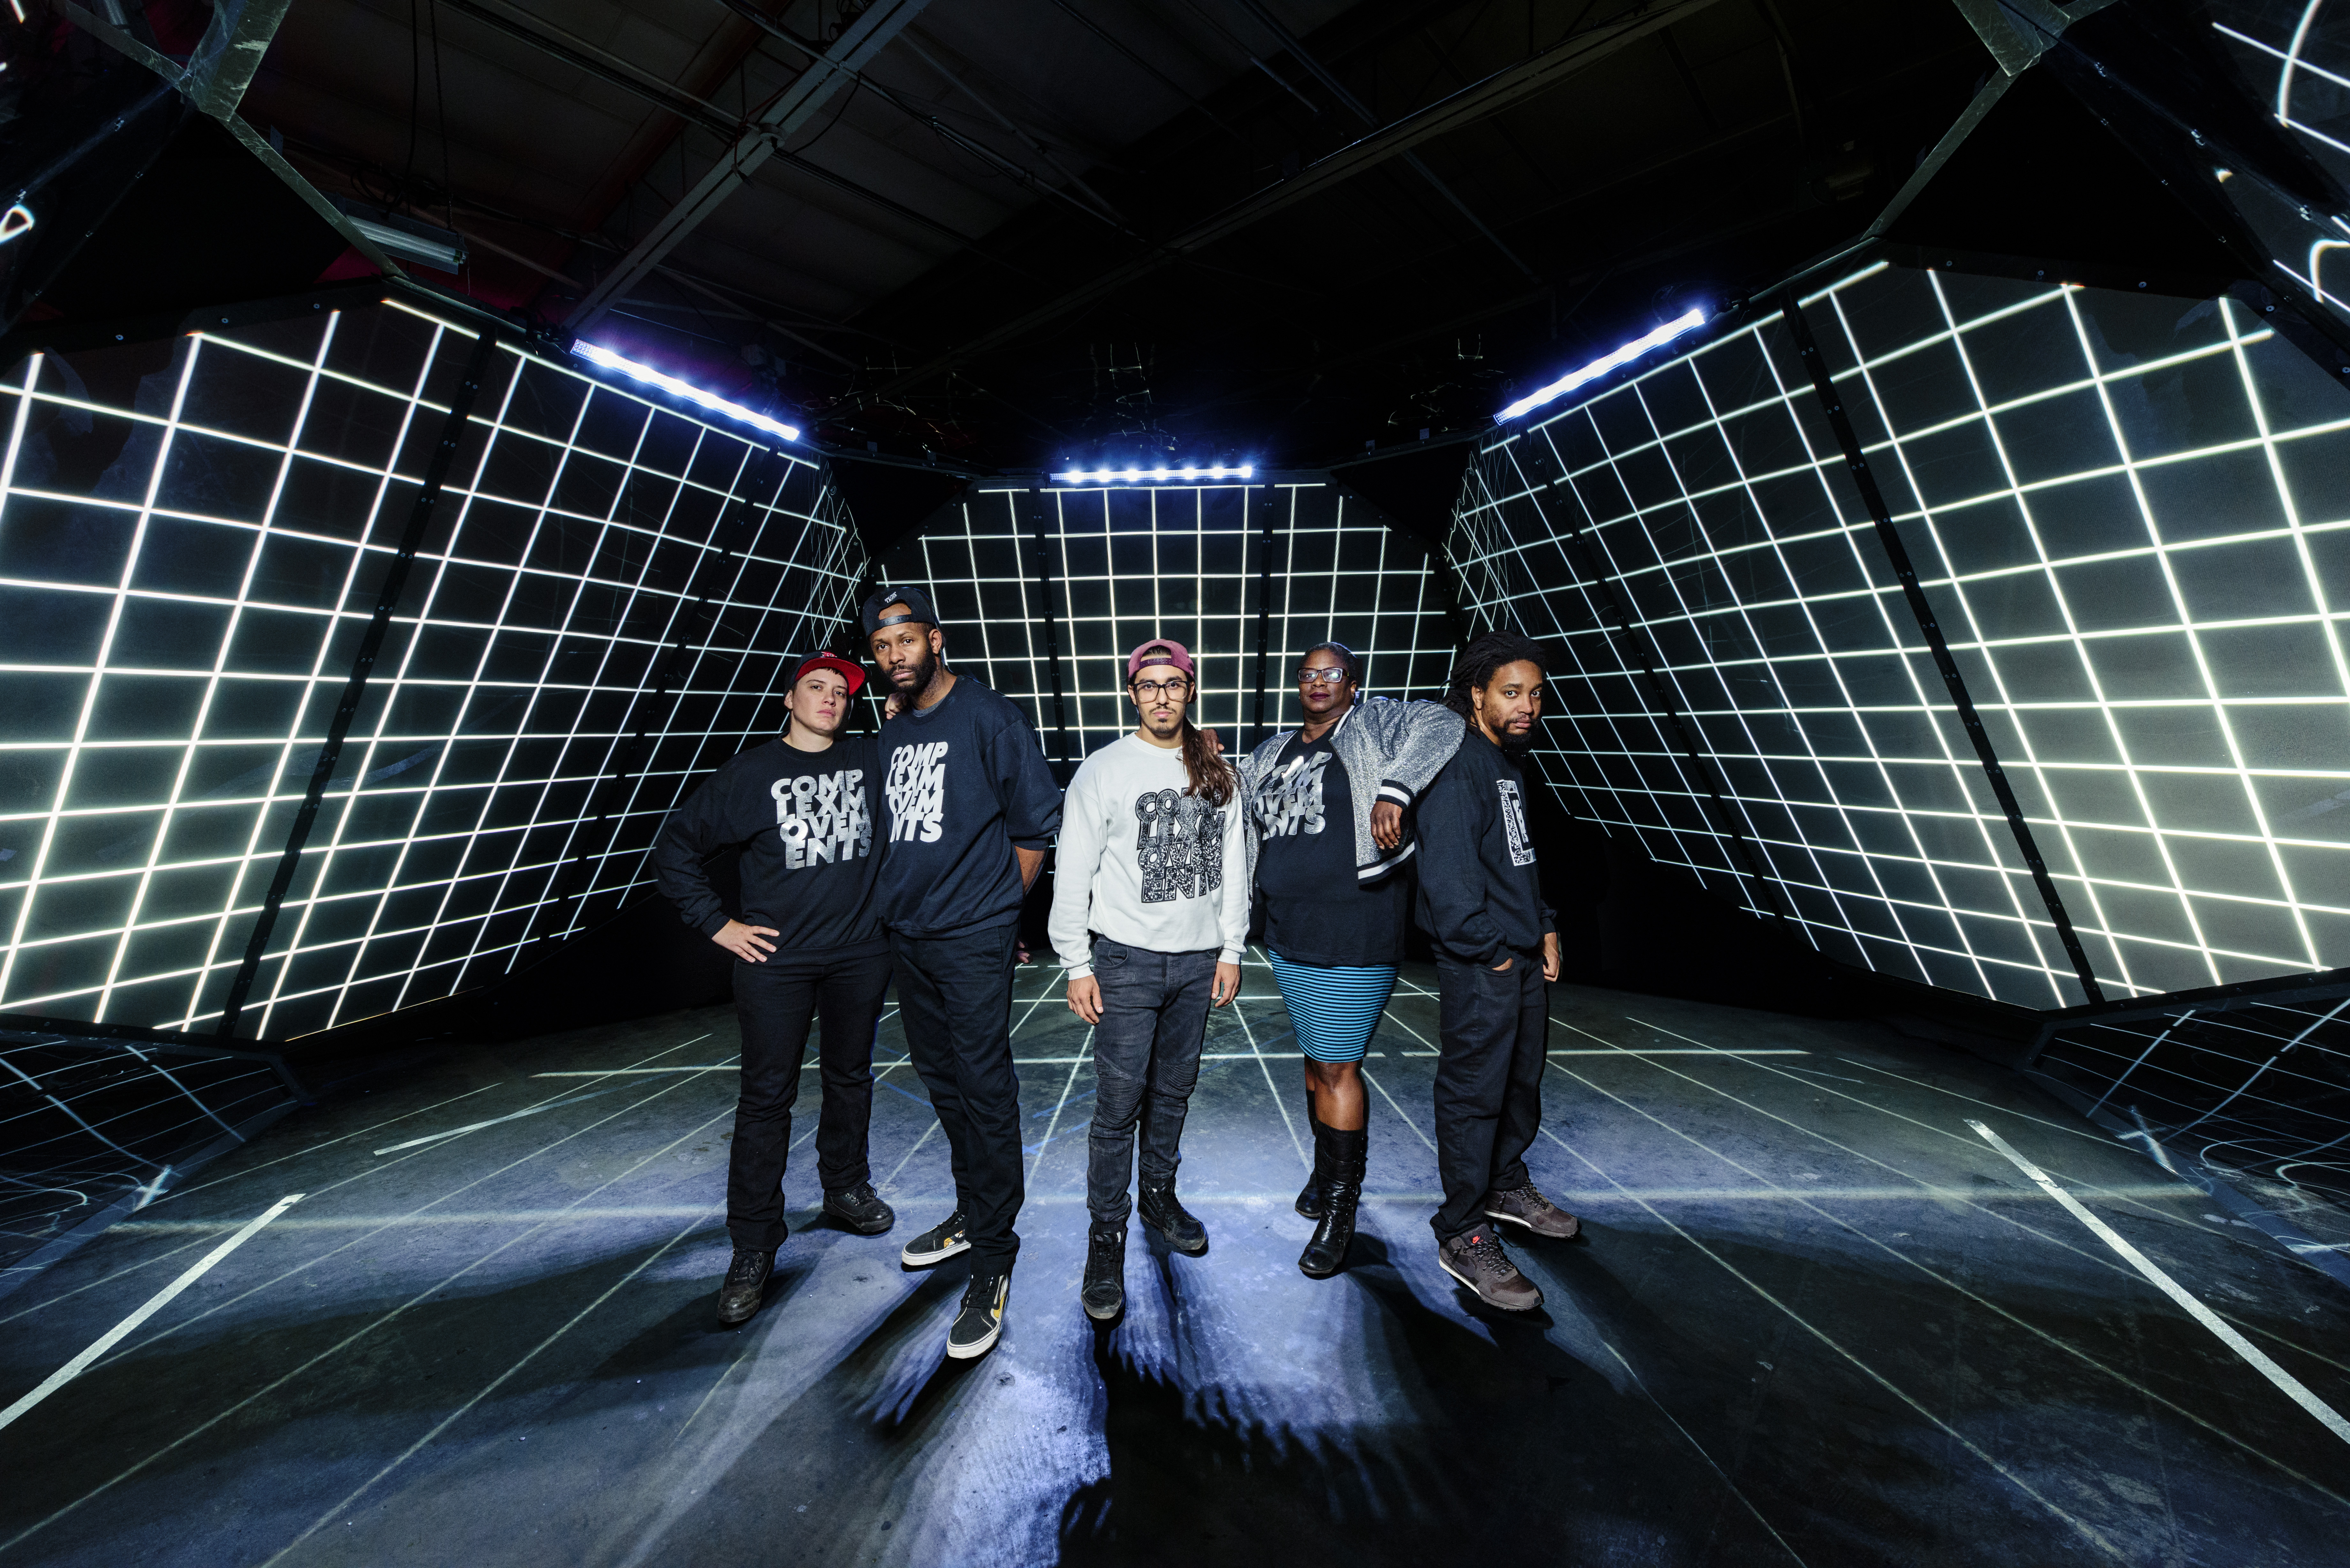 Five people standing in gridded dome: (L to R: ill Weaver/Invincible, Waajeed, L05/Carlos Garcia,_Sage Crump, Wesley Taylor). image credit: Doug Coombe